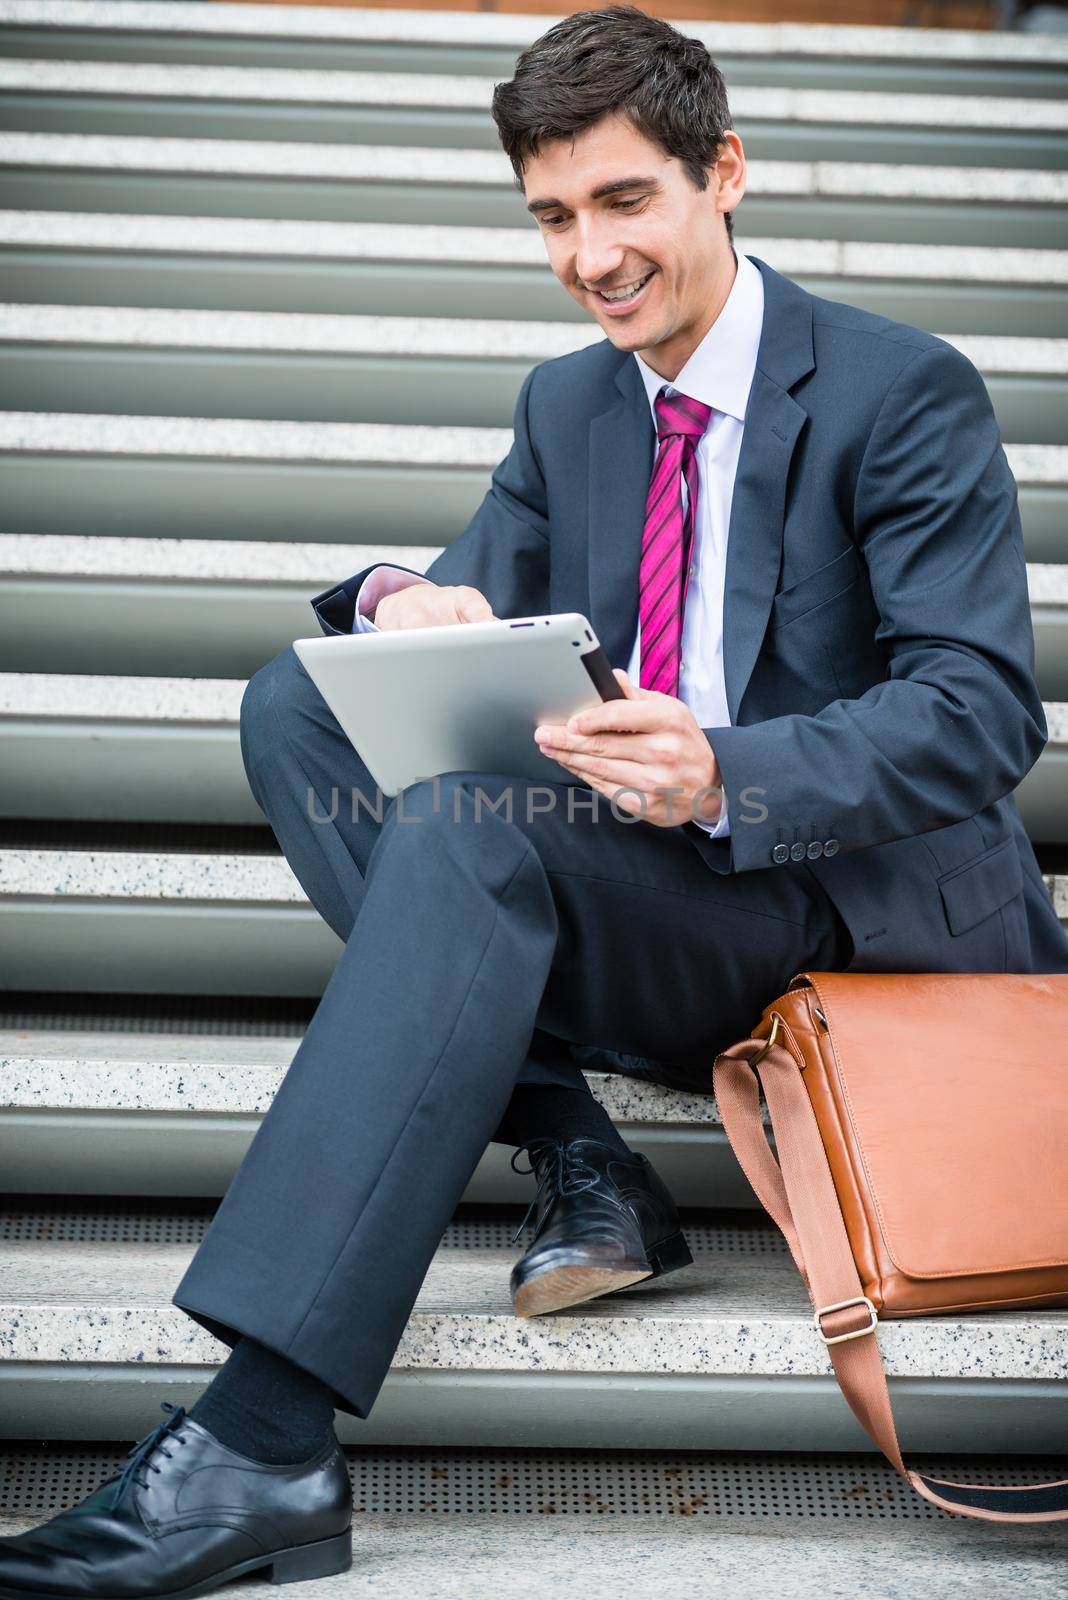 Businessman using a tablet for communication or data storage out by Kzenon